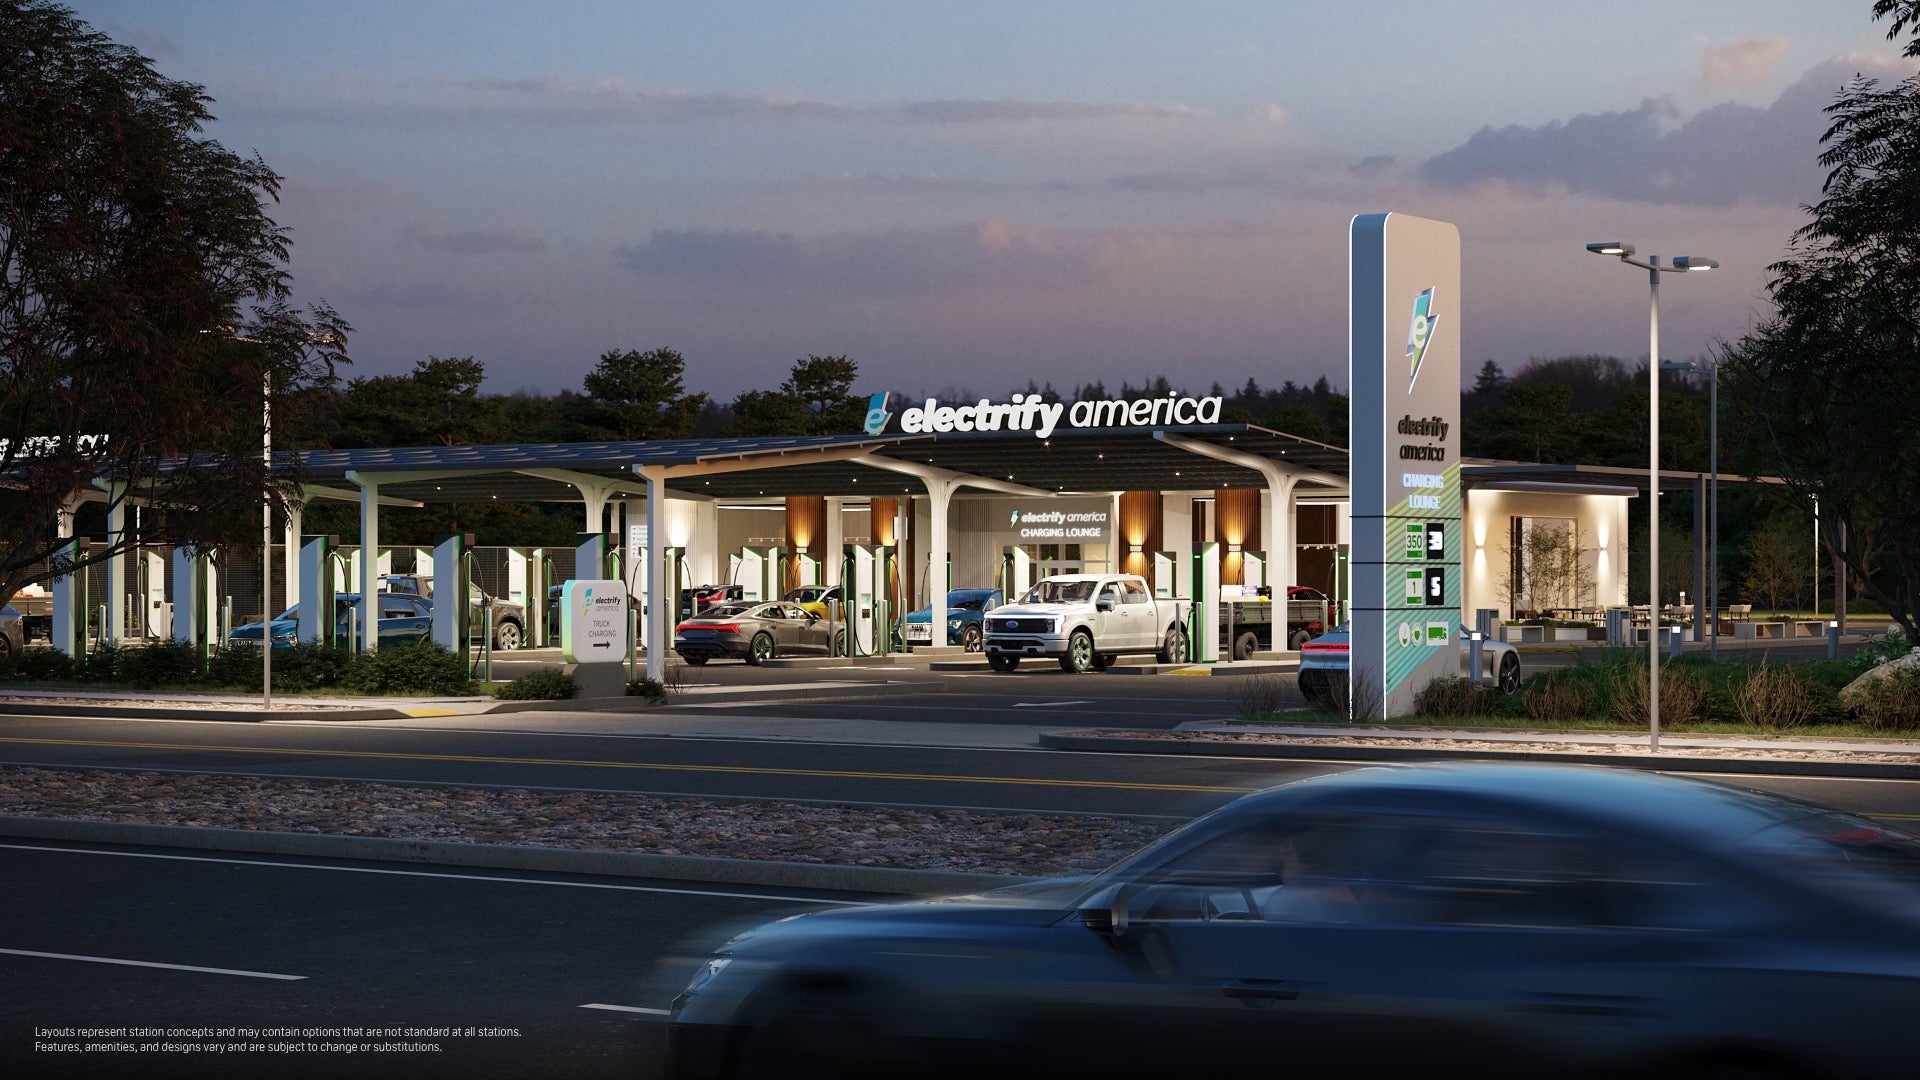 Electrify America’s New EV Charging Stations Look Like the Best Yet